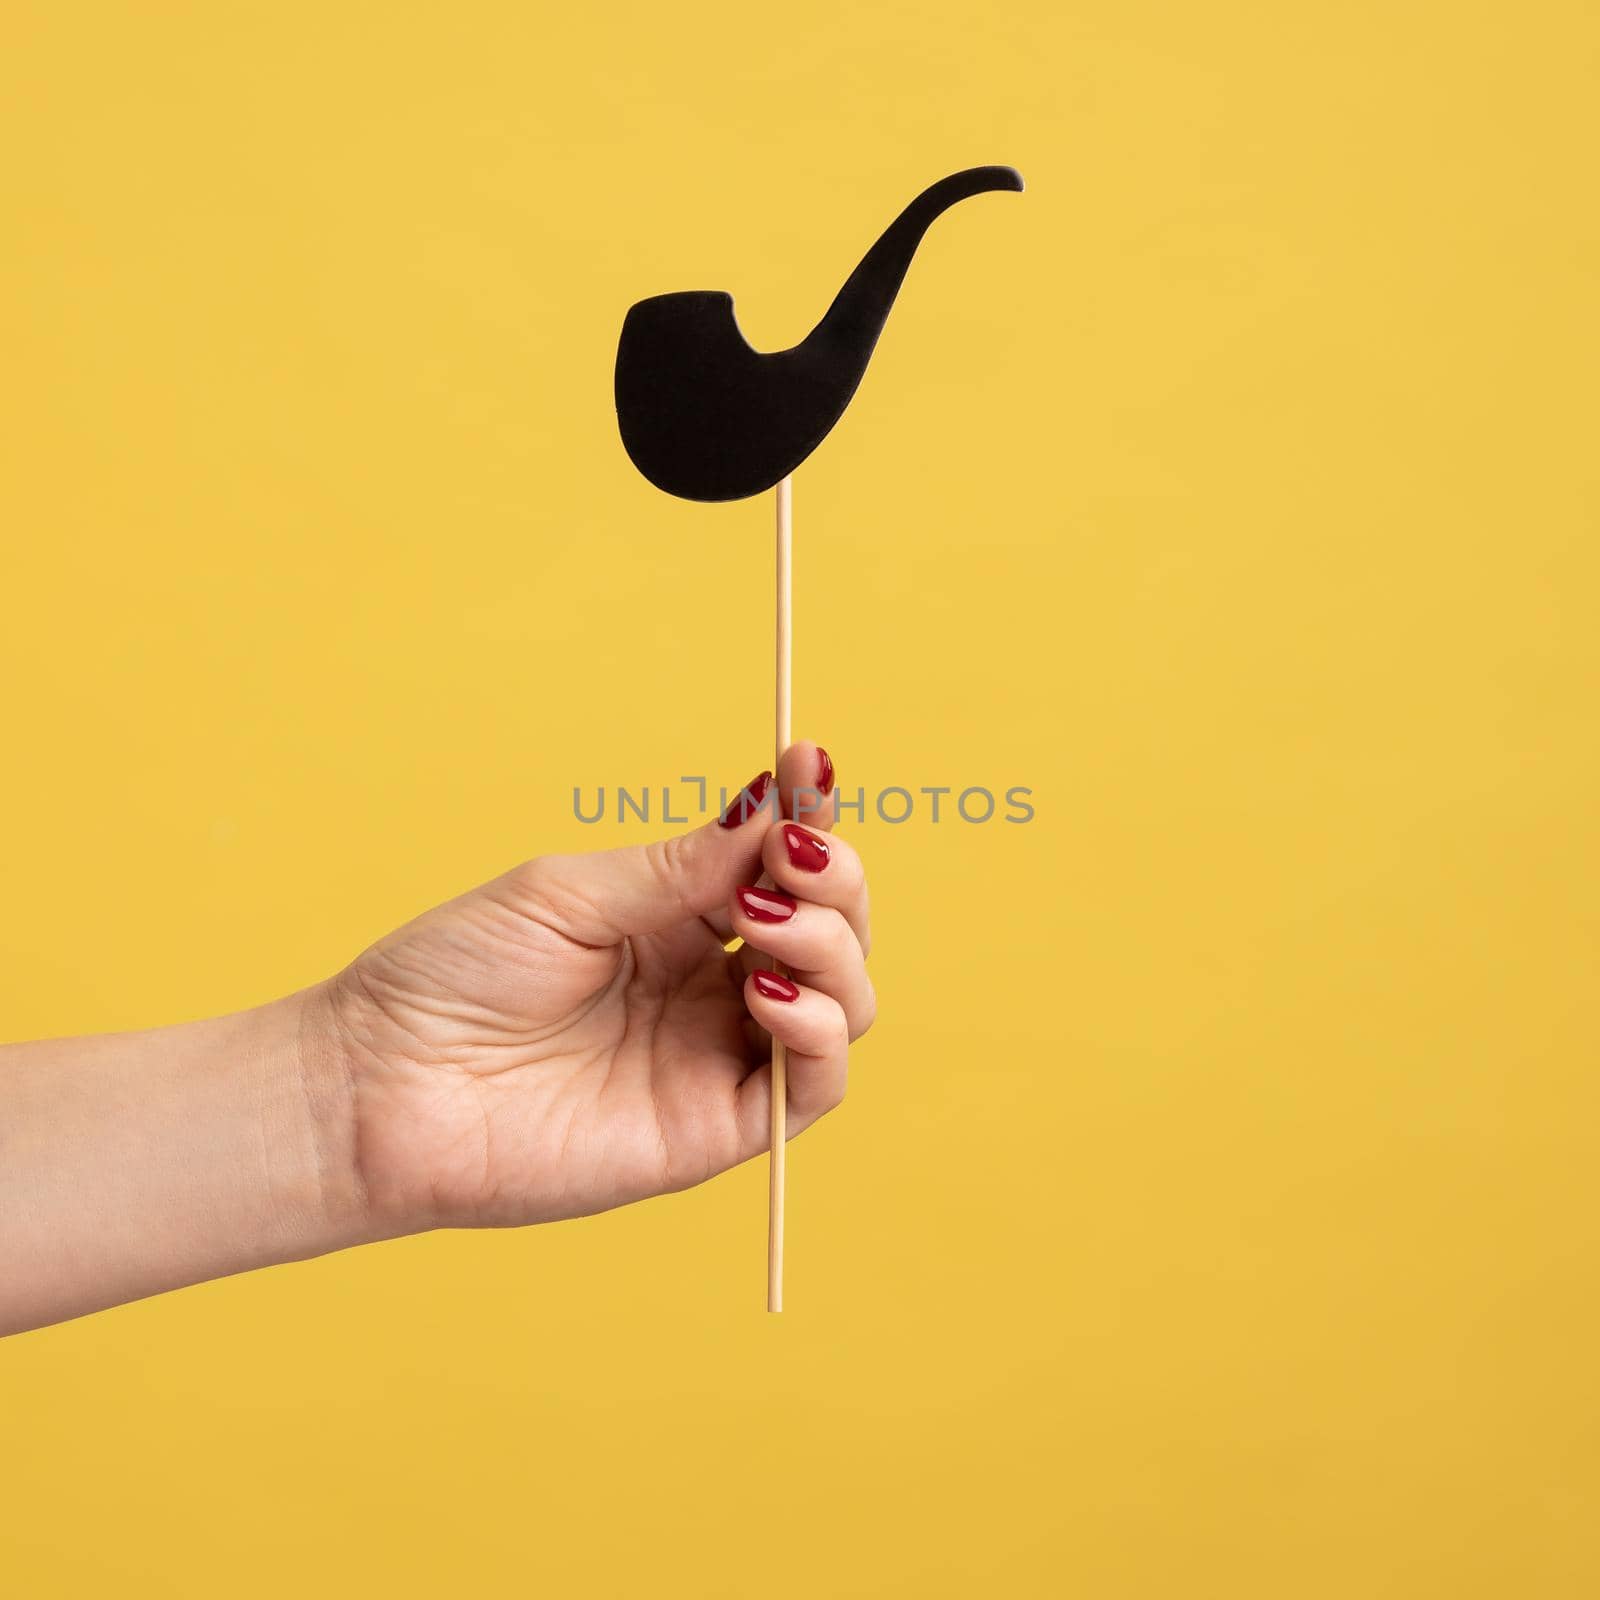 Closeup side view portrait of woman hand holding festive party props, black paper pipe on stick. by Khosro1